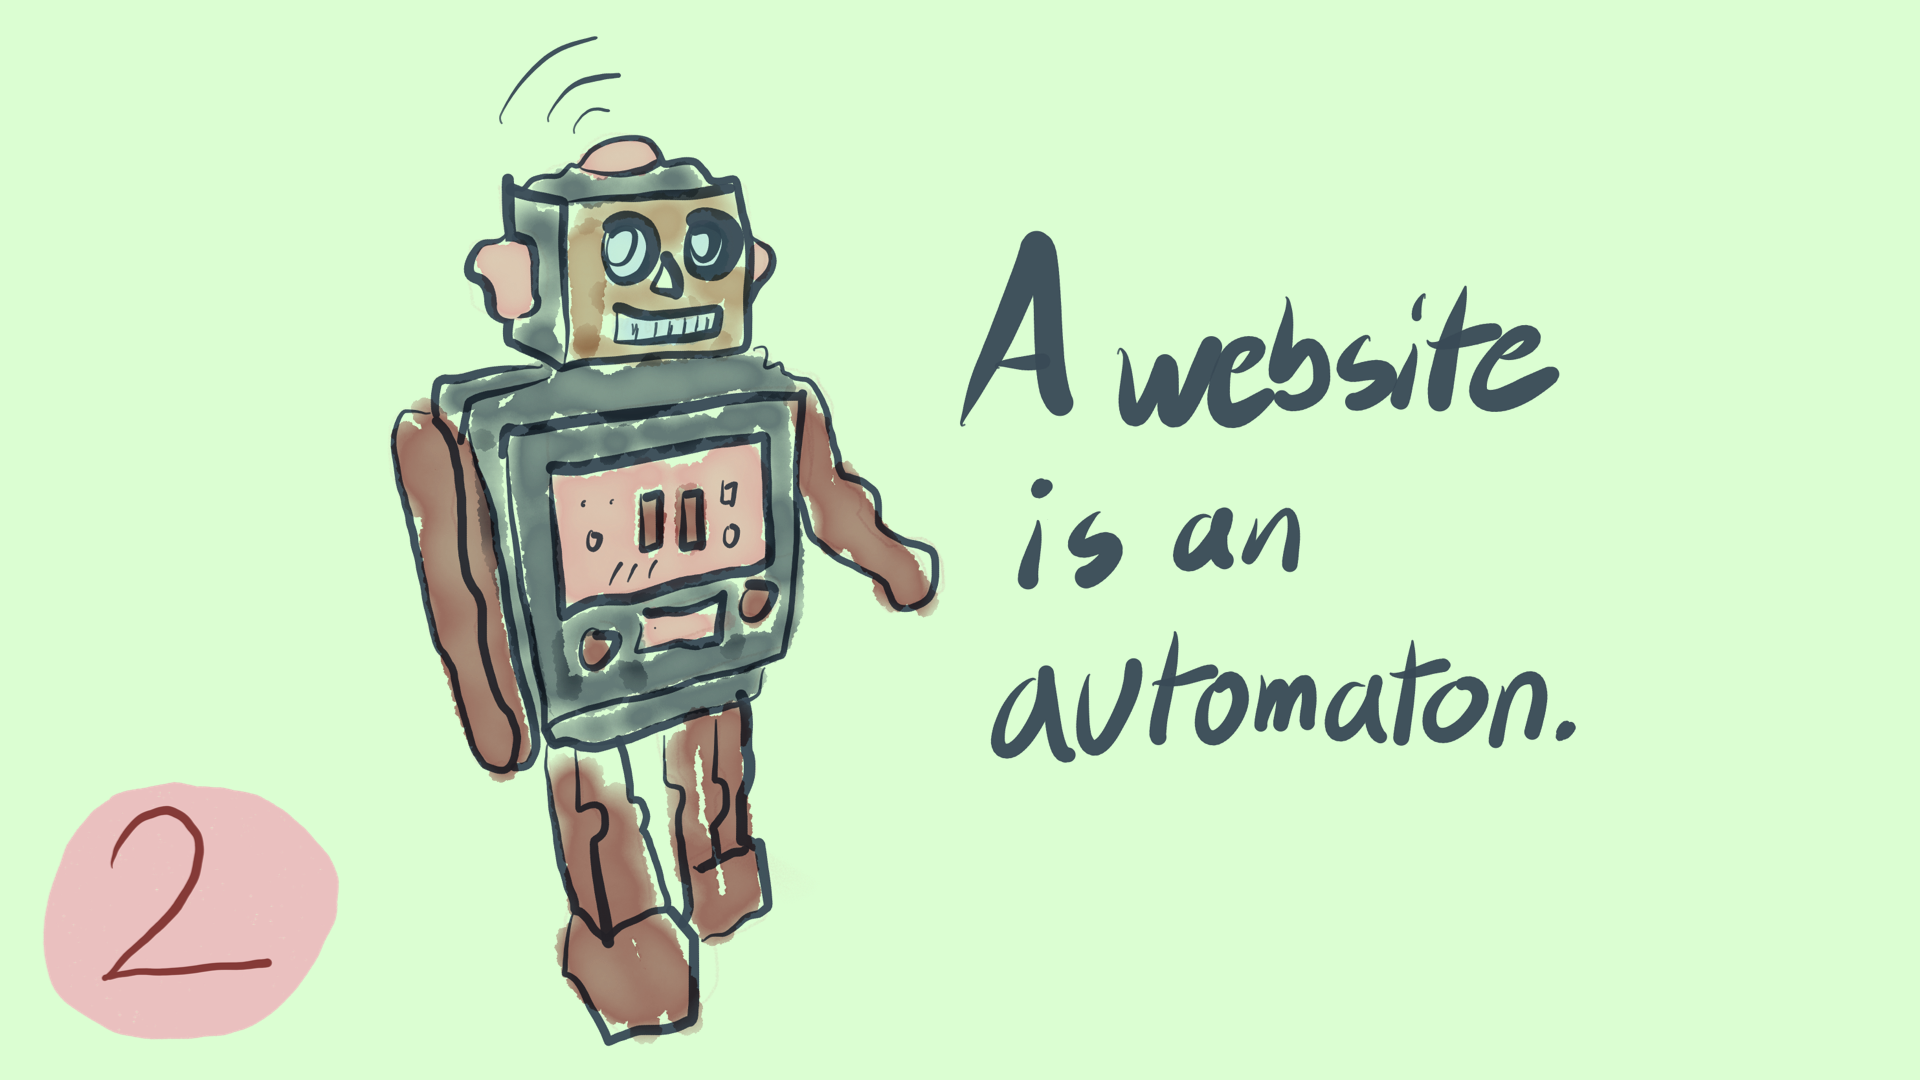 Illustration of a bipedal toy robot with the text "A website is an automaton"